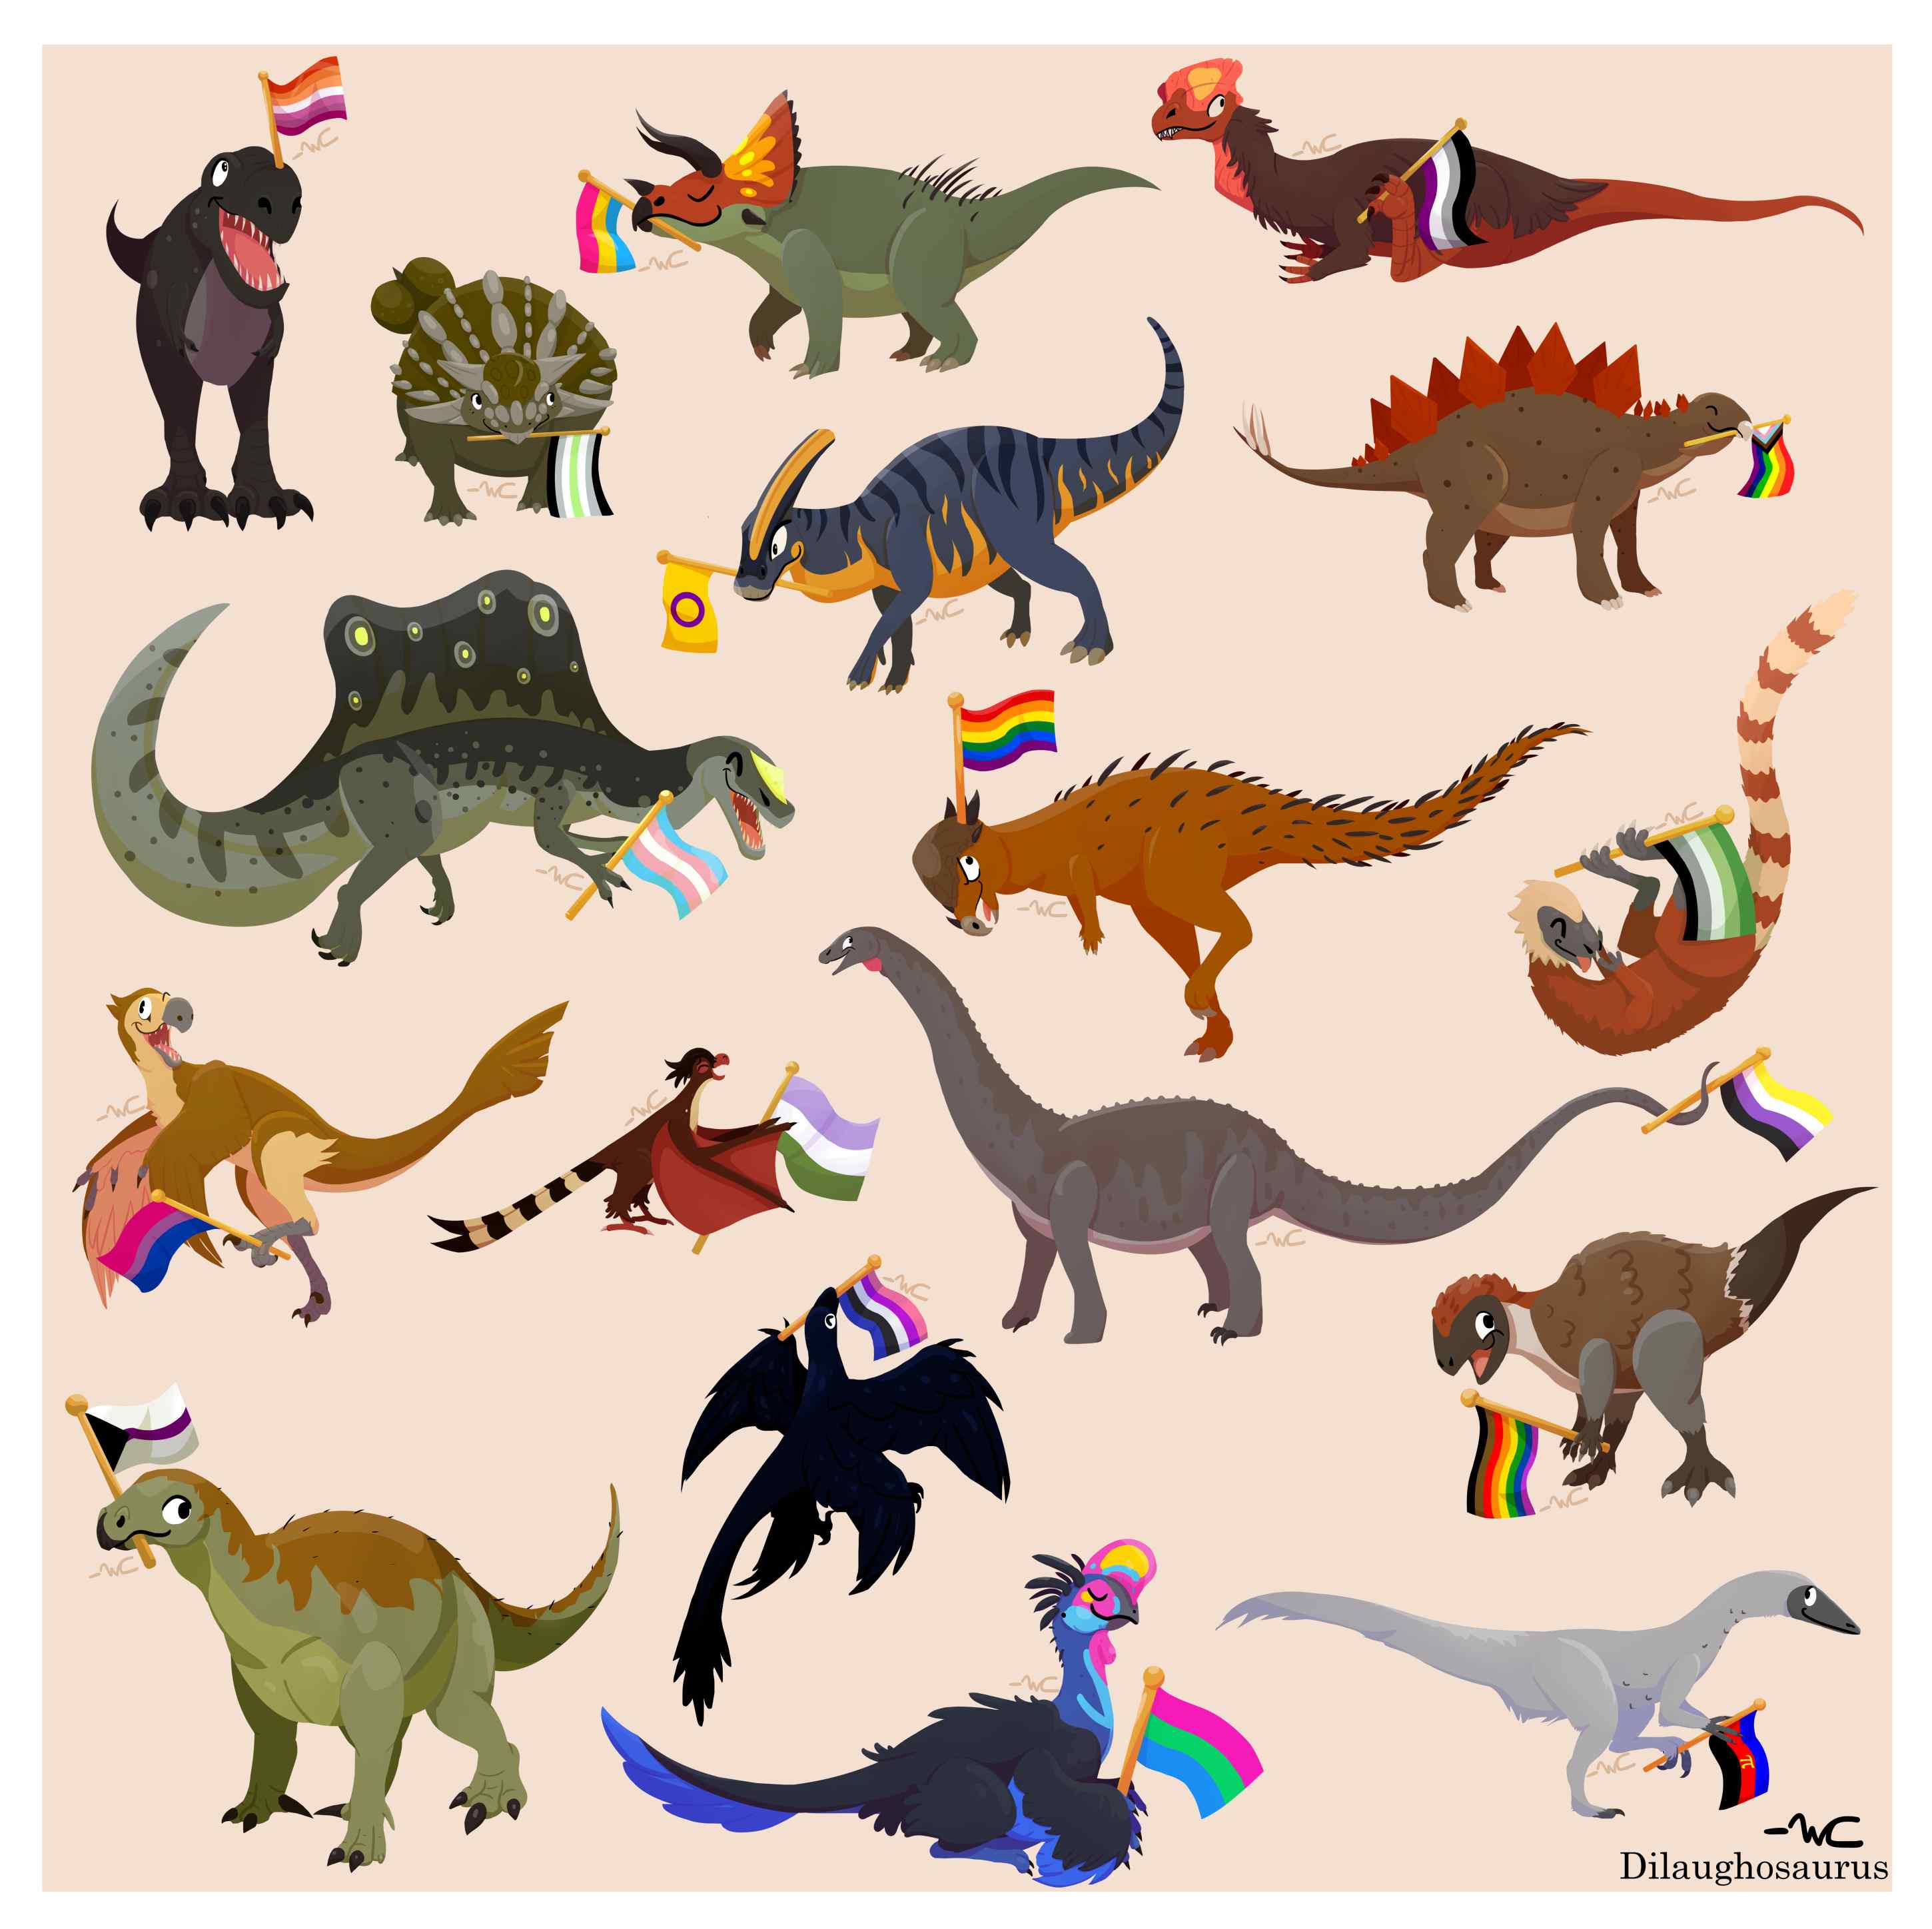 A collection of cartoon dinosaurs holding different pride flags.